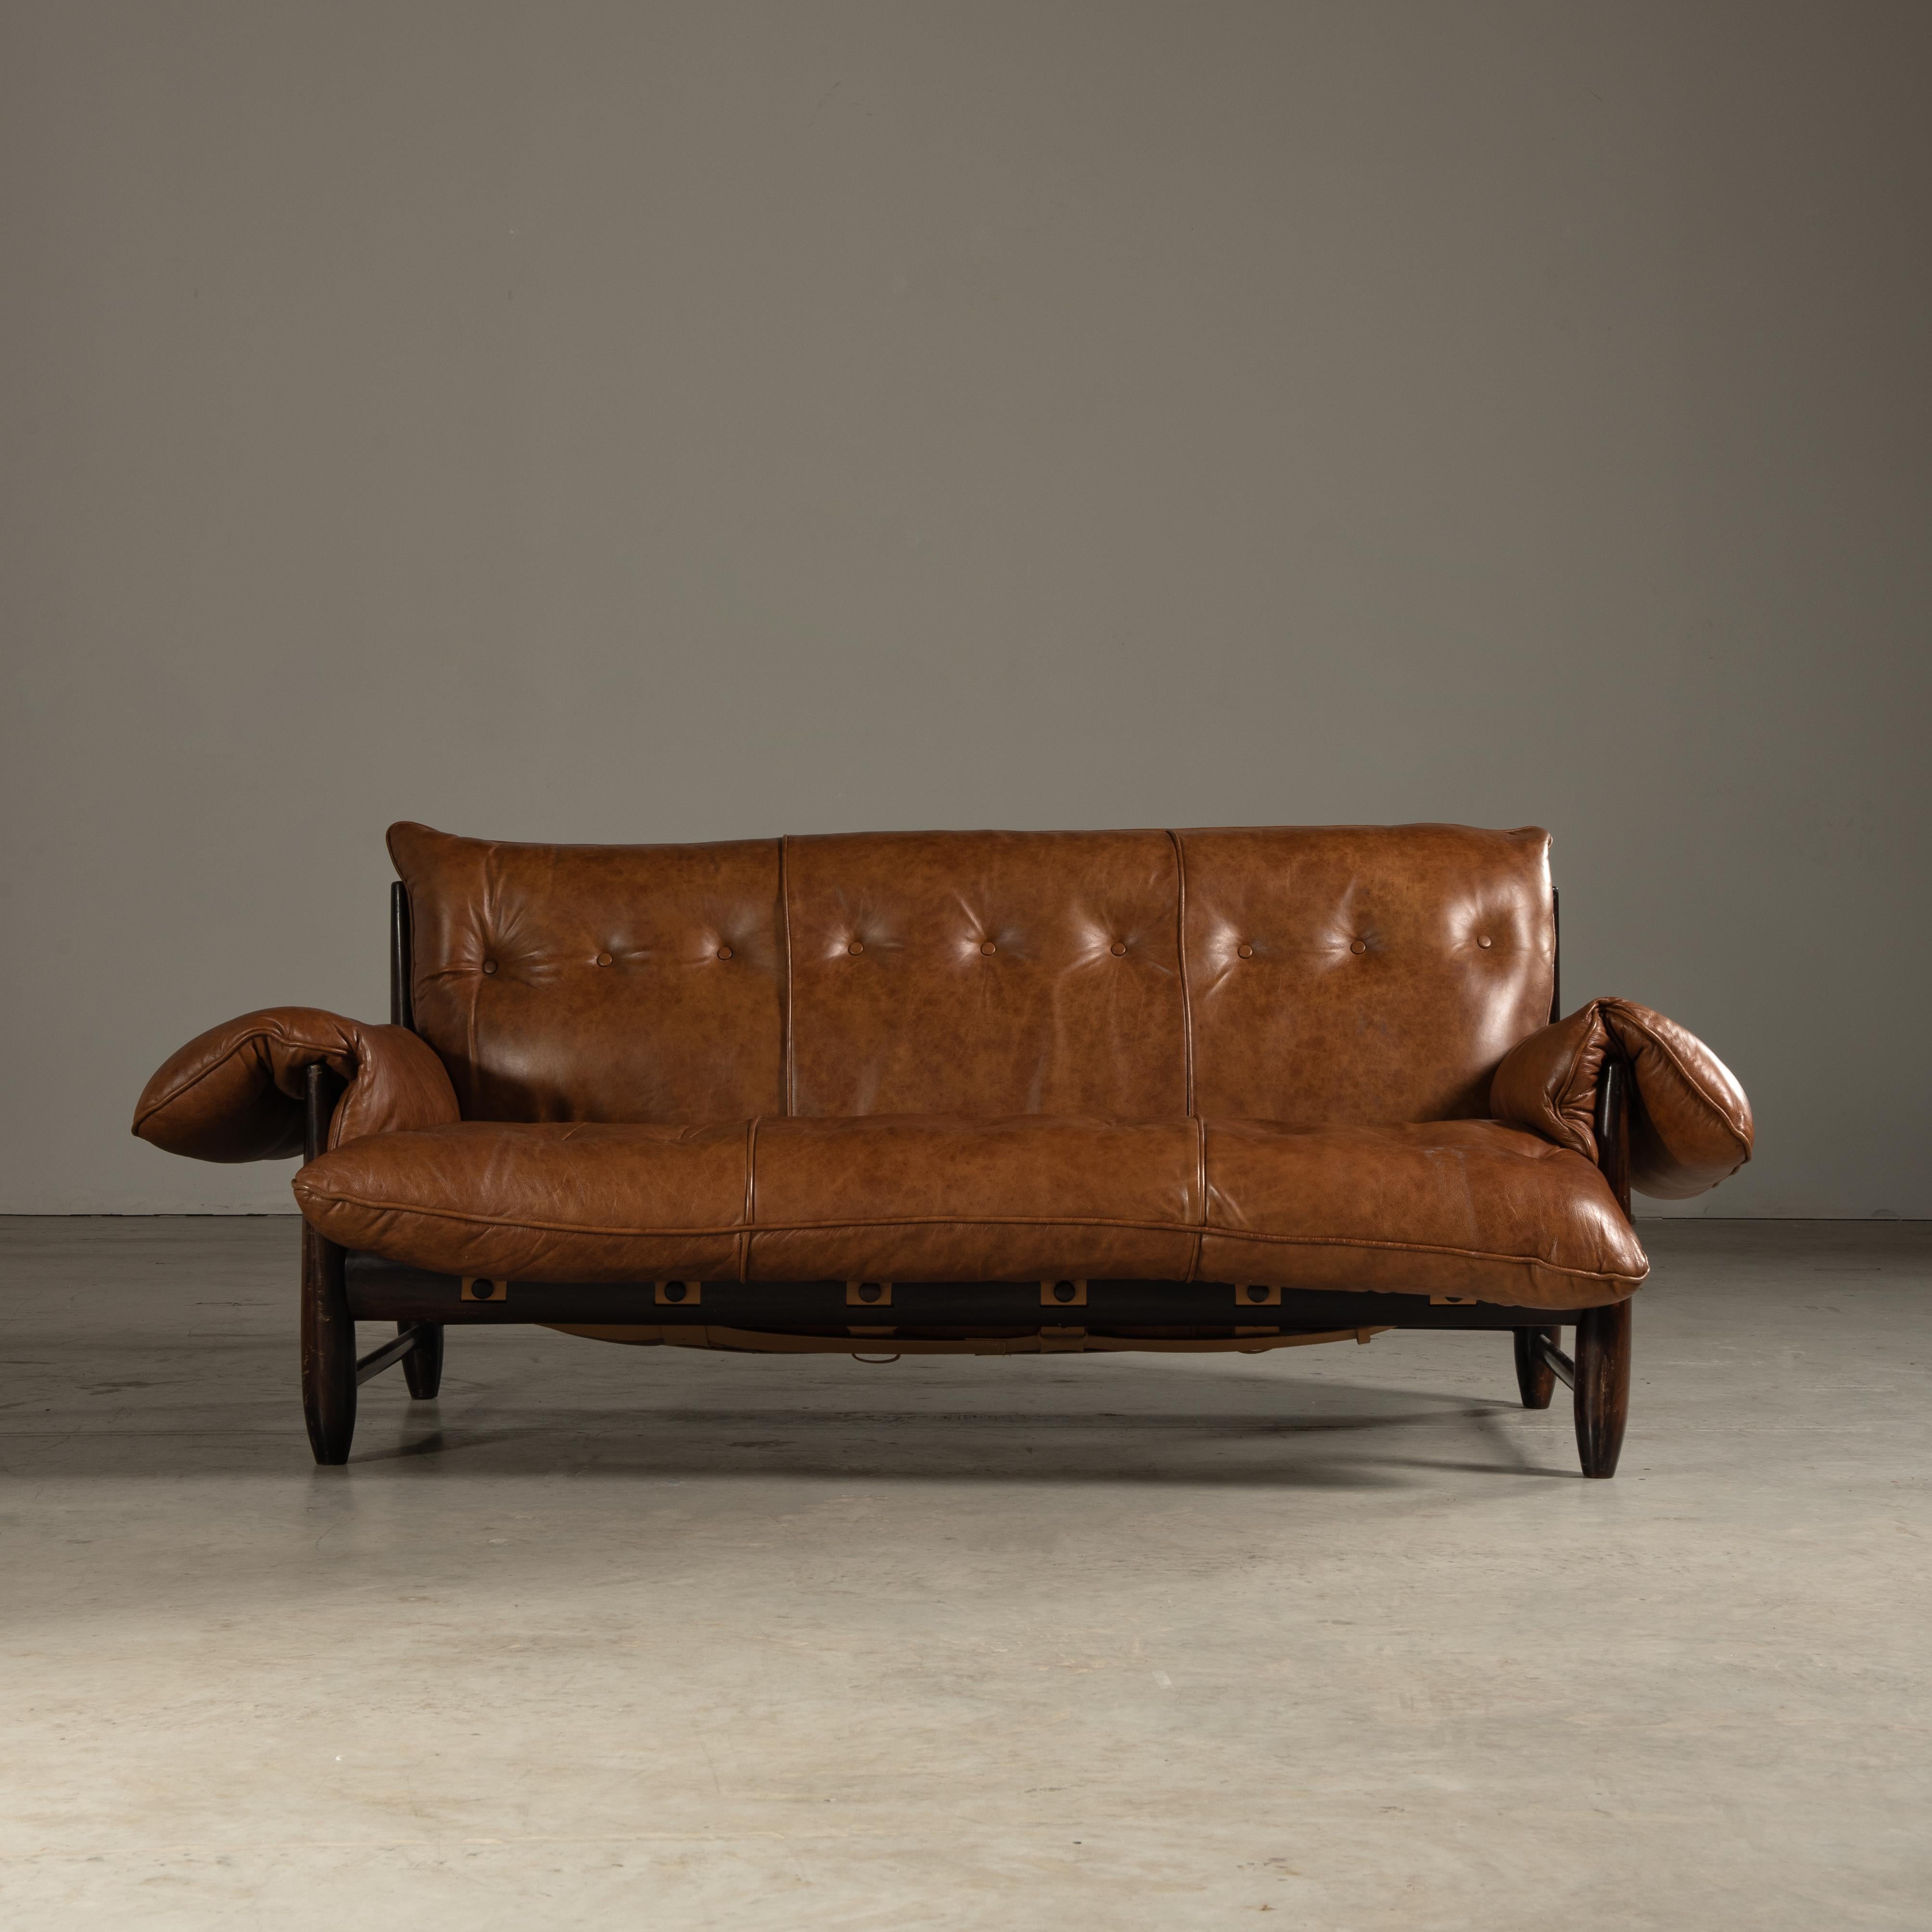 The 'Mole' sofa, designed by Sergio Rodrigues, is not only an iconic piece of mid-20th century Brazilian furniture but also a crowning achievement in the designer's illustrious career. This sofa epitomizes Rodrigues' exceptional talent for melding